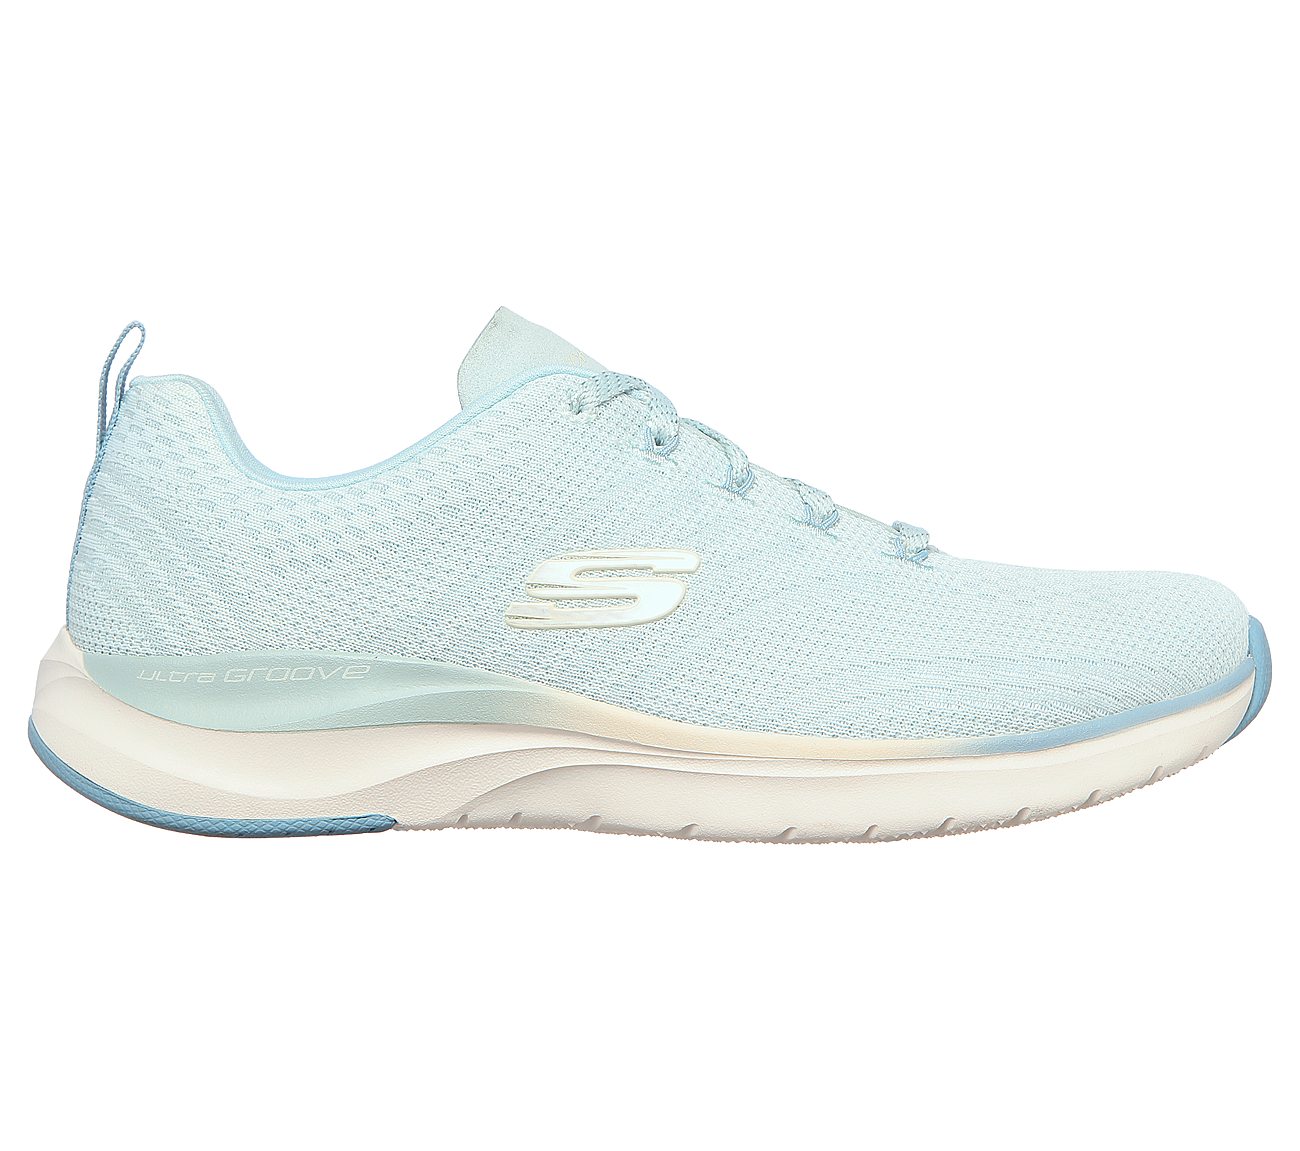 ULTRA GROOVE - PURE VISION, LLIGHT BLUE Footwear Right View